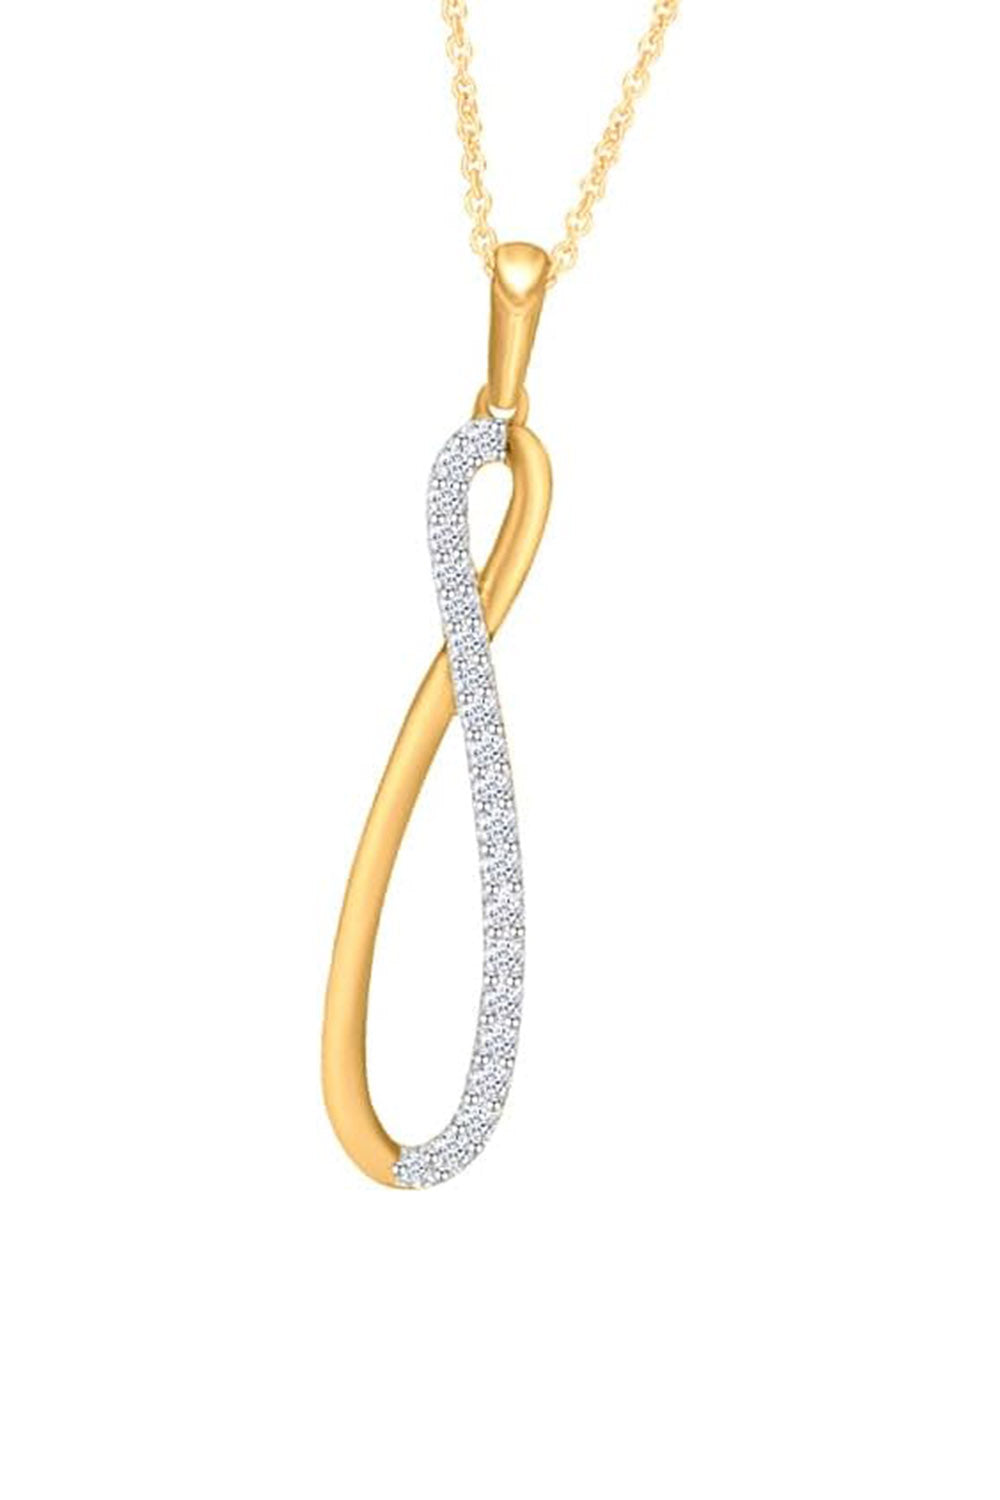 Yellow Gold Color Round Cut Moissanite Diamond Infinity Pendant Necklace